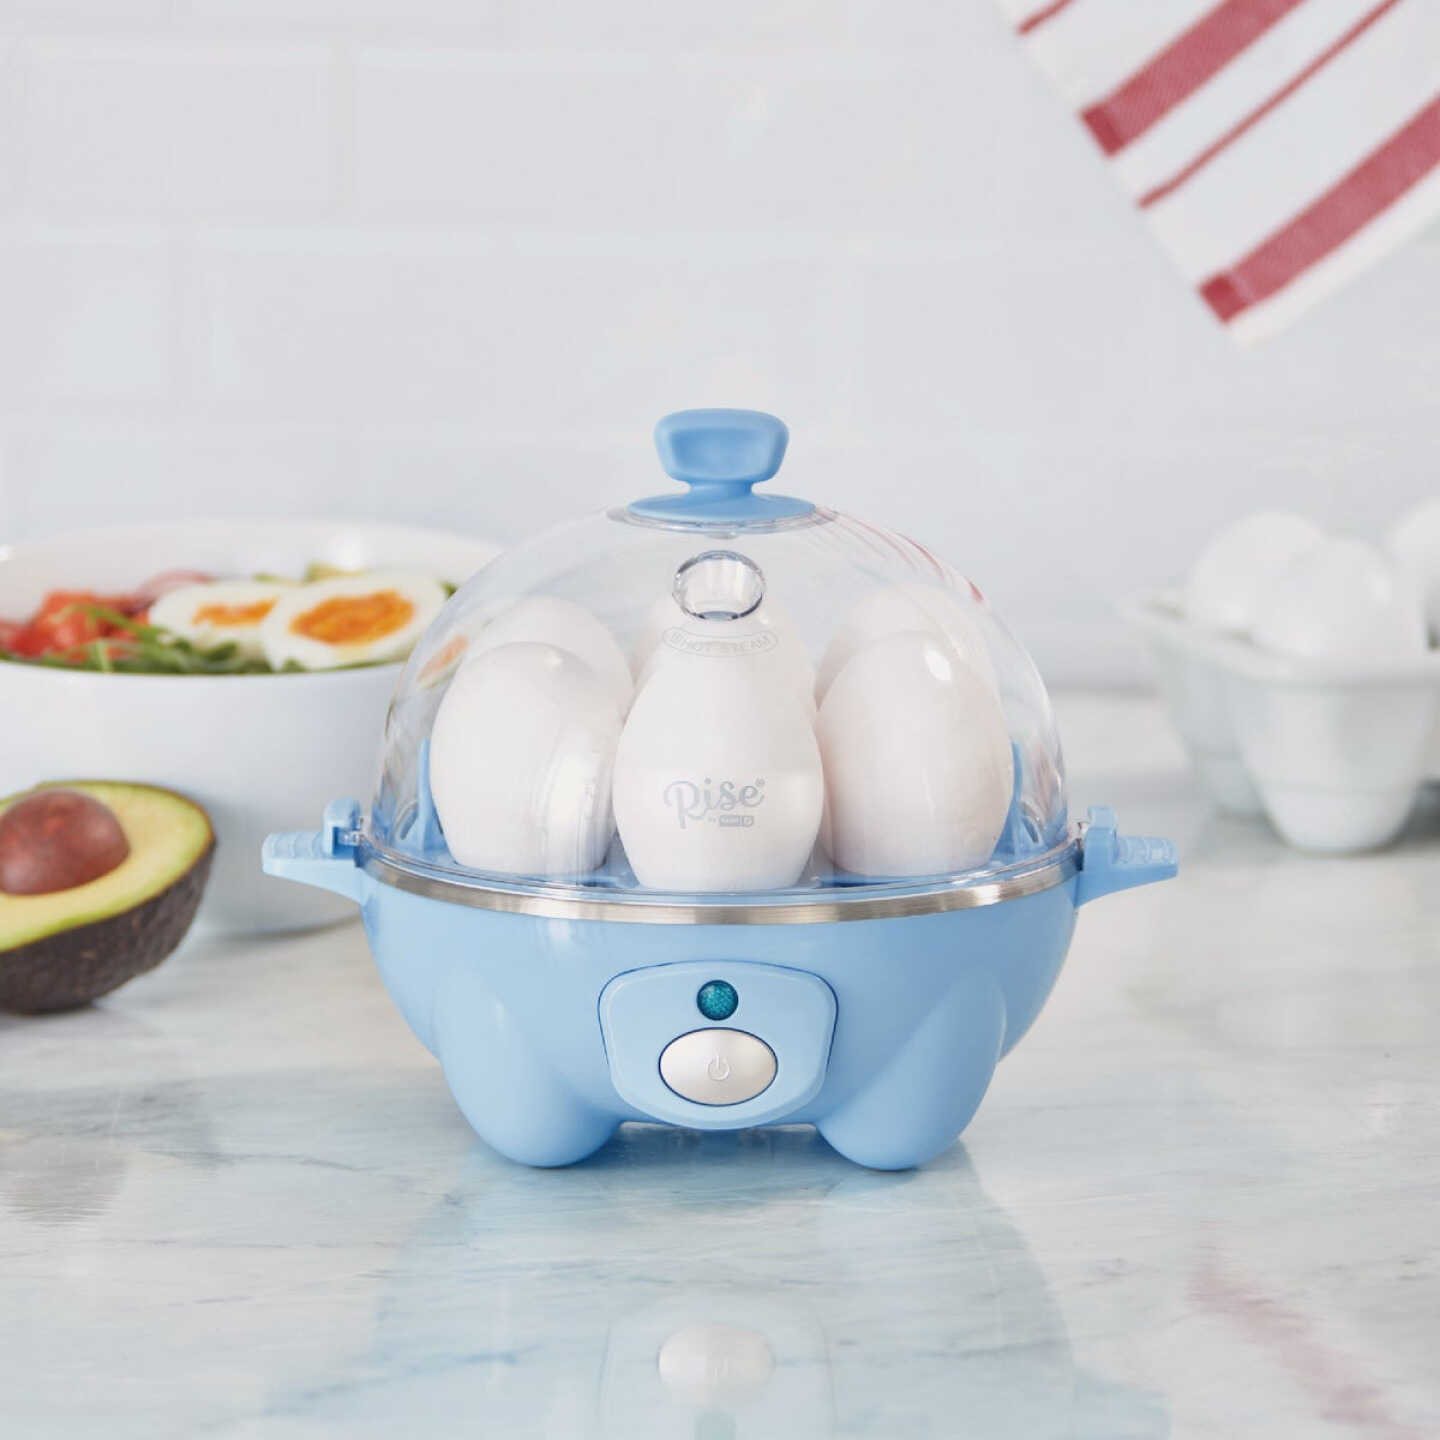 DASH DELUXE RAPID EGG COOKER - household items - by owner